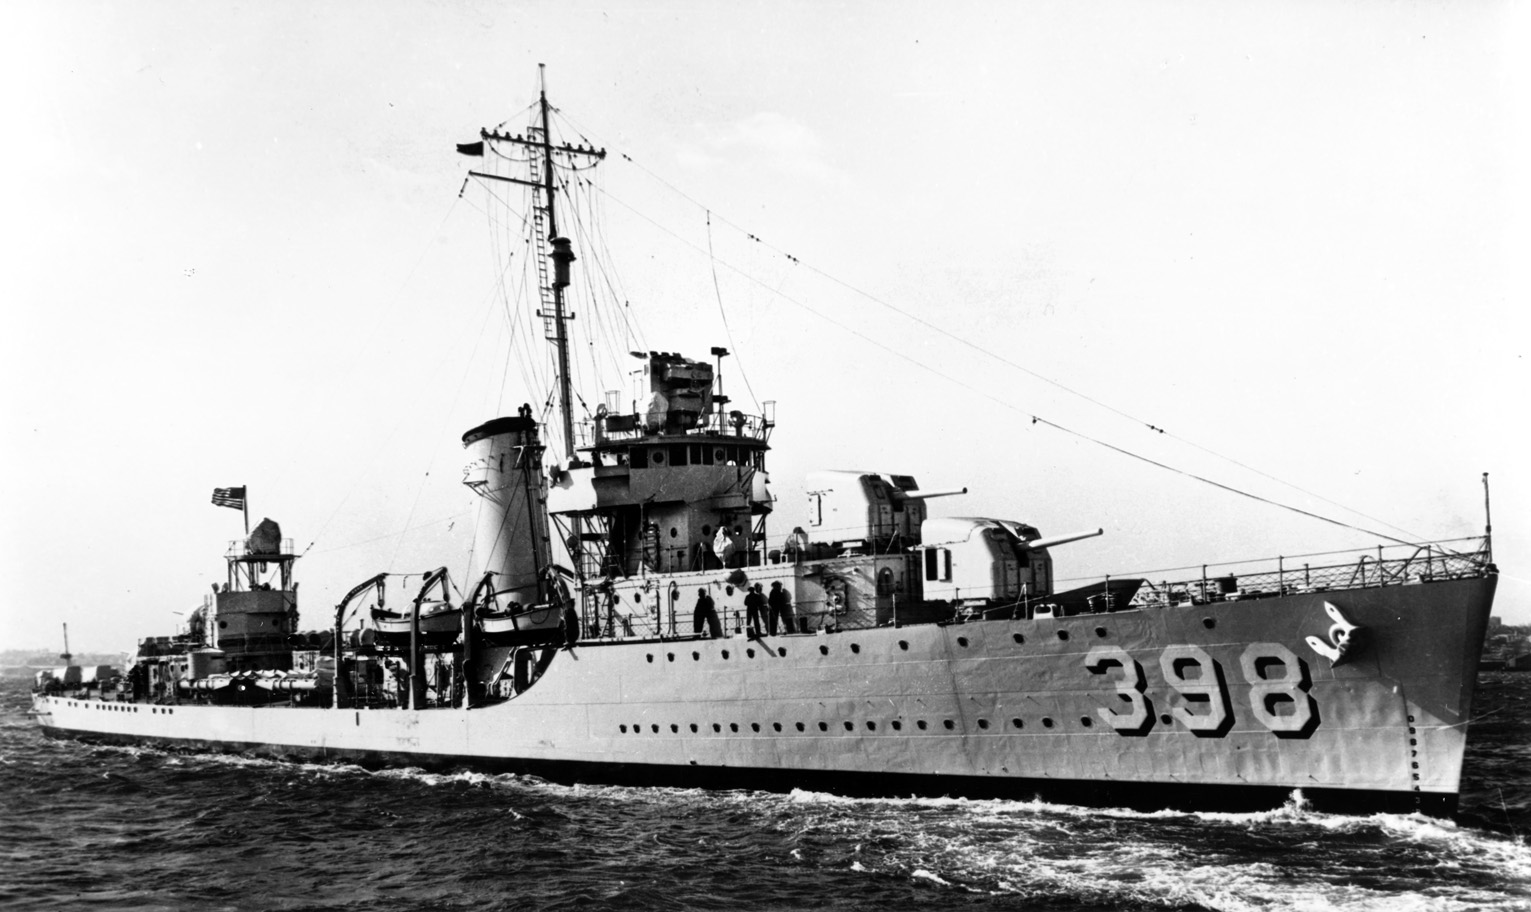 The destroyer USS Ellet is photographed at sea in February 1939. Eugene Simpson served as an officer aboard the destroyer during the disastrous Battle of Savo Island in the Solomons in August 1942. 